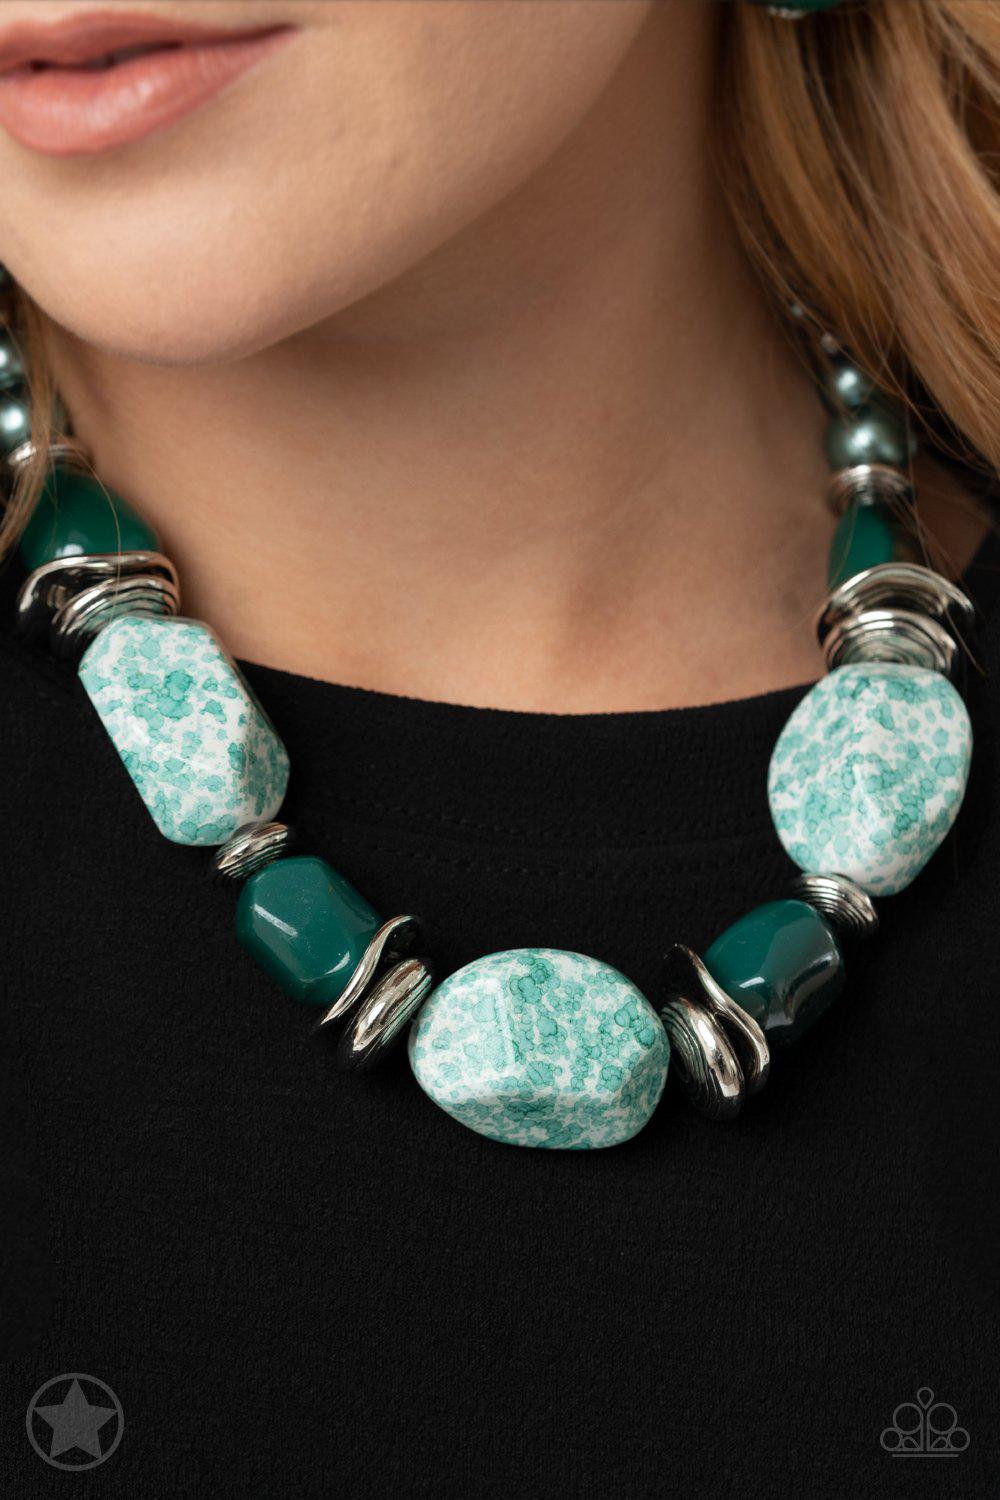 In Good Glazes Chunky Blue Necklace and matching Earrings - Paparazzi Accessories - lightbox -CarasShop.com - $5 Jewelry by Cara Jewels